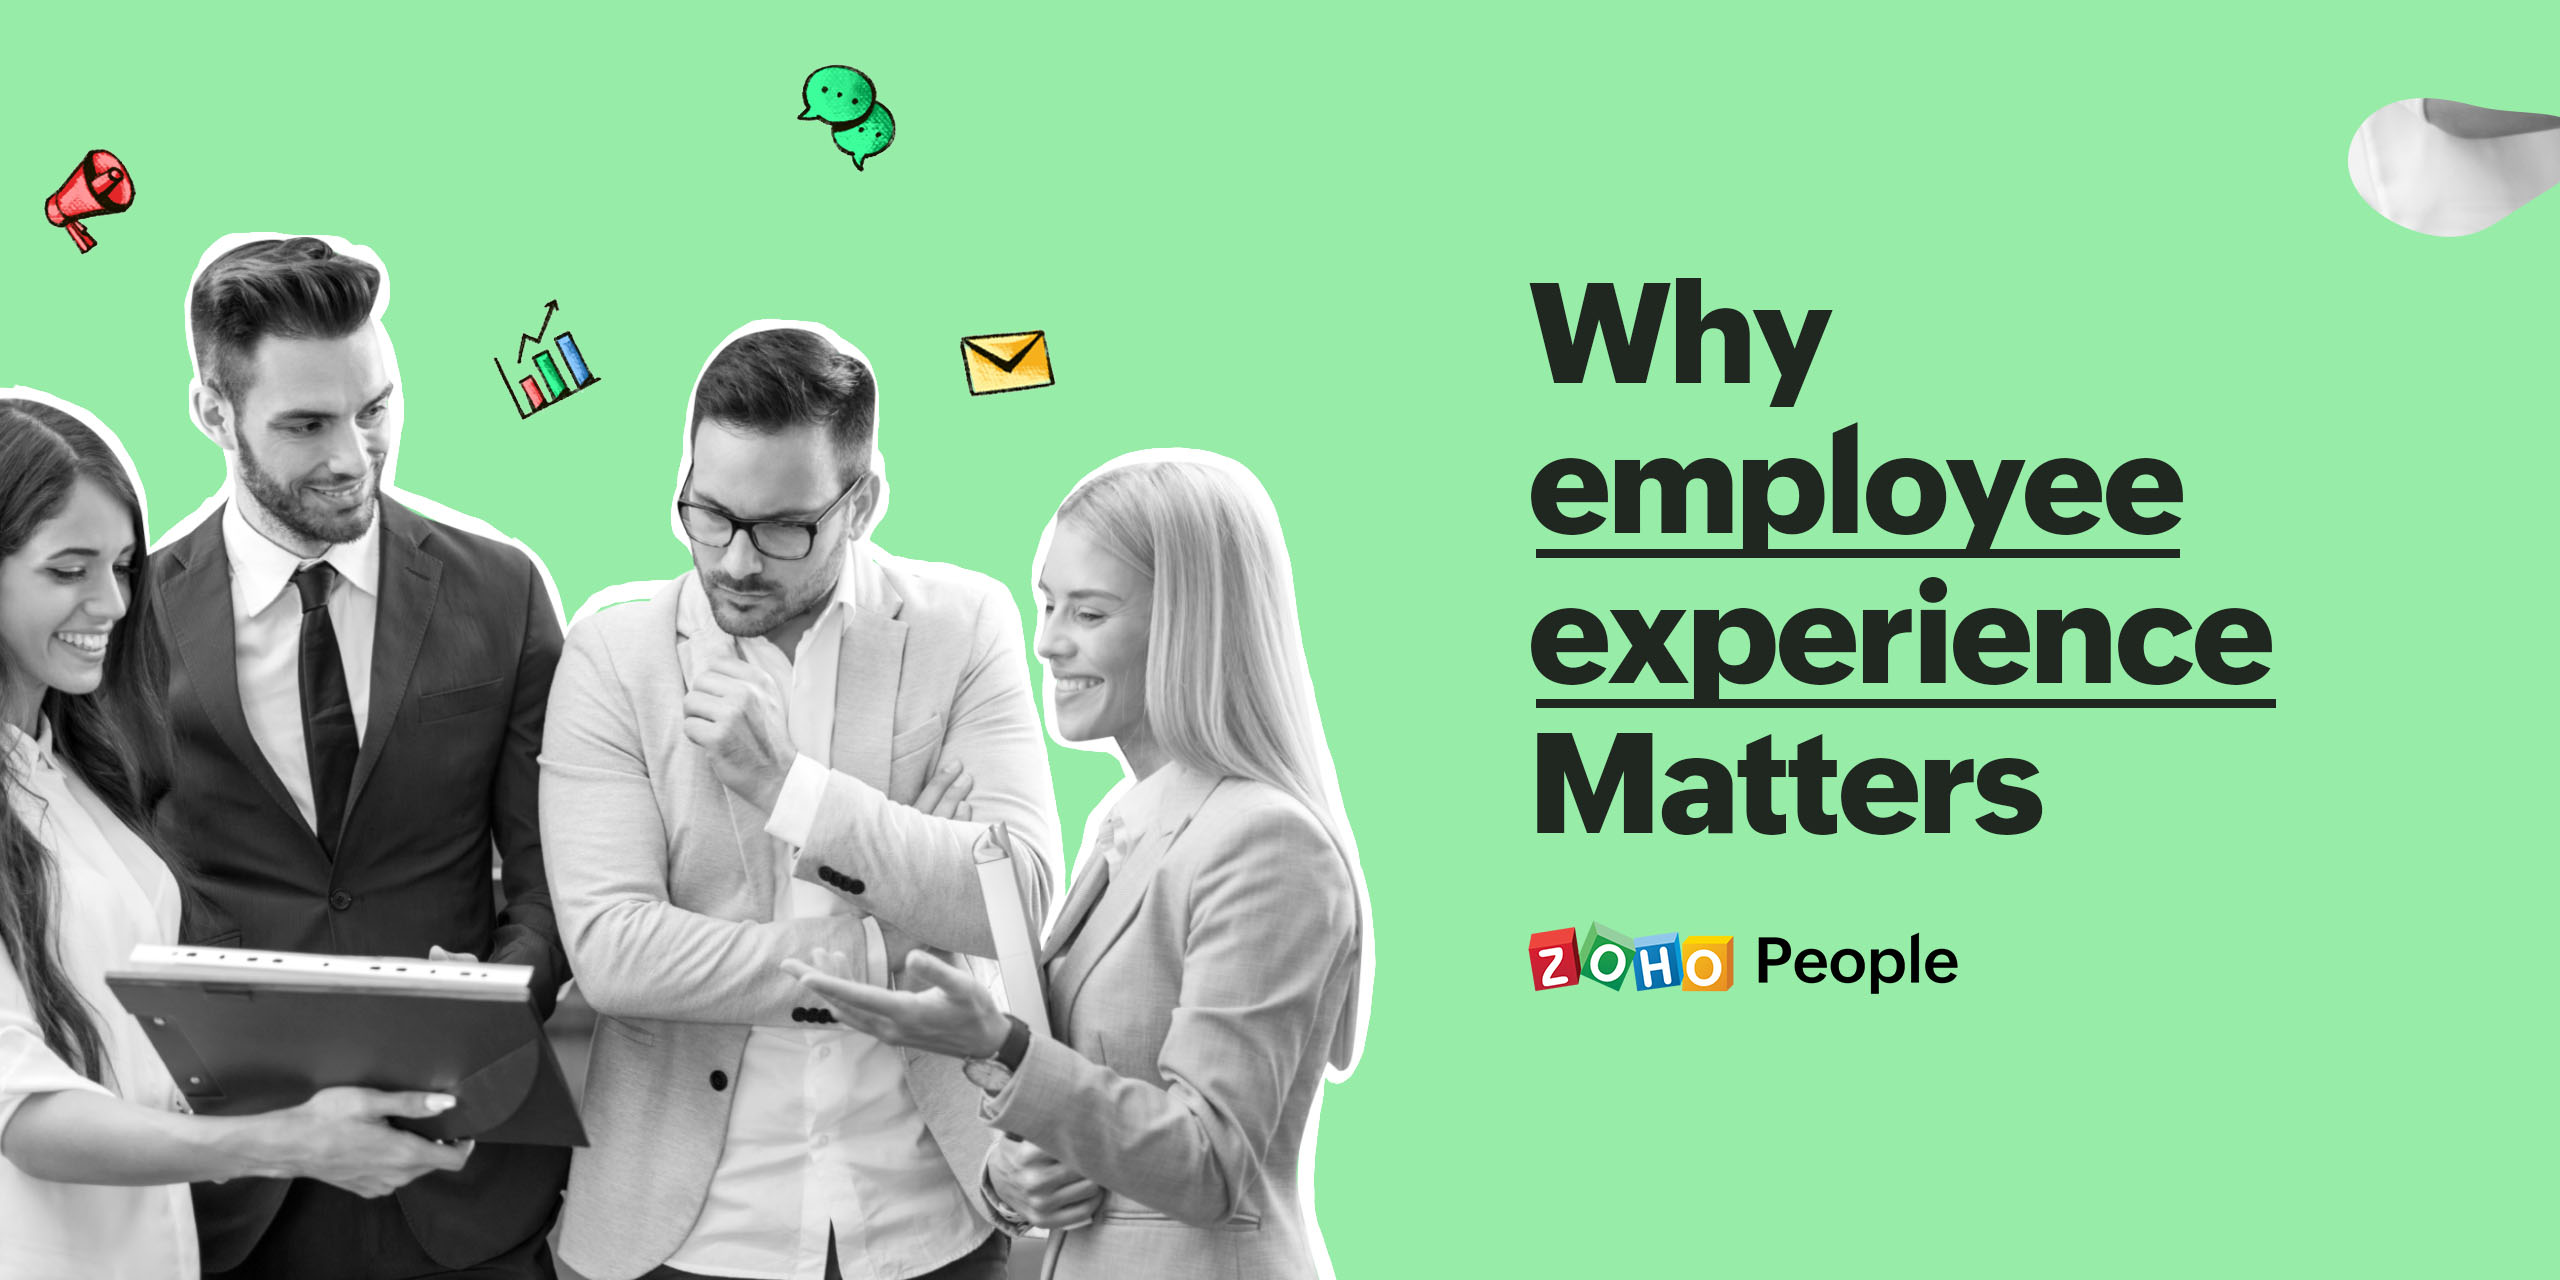 Top reasons why employee experience mattersx